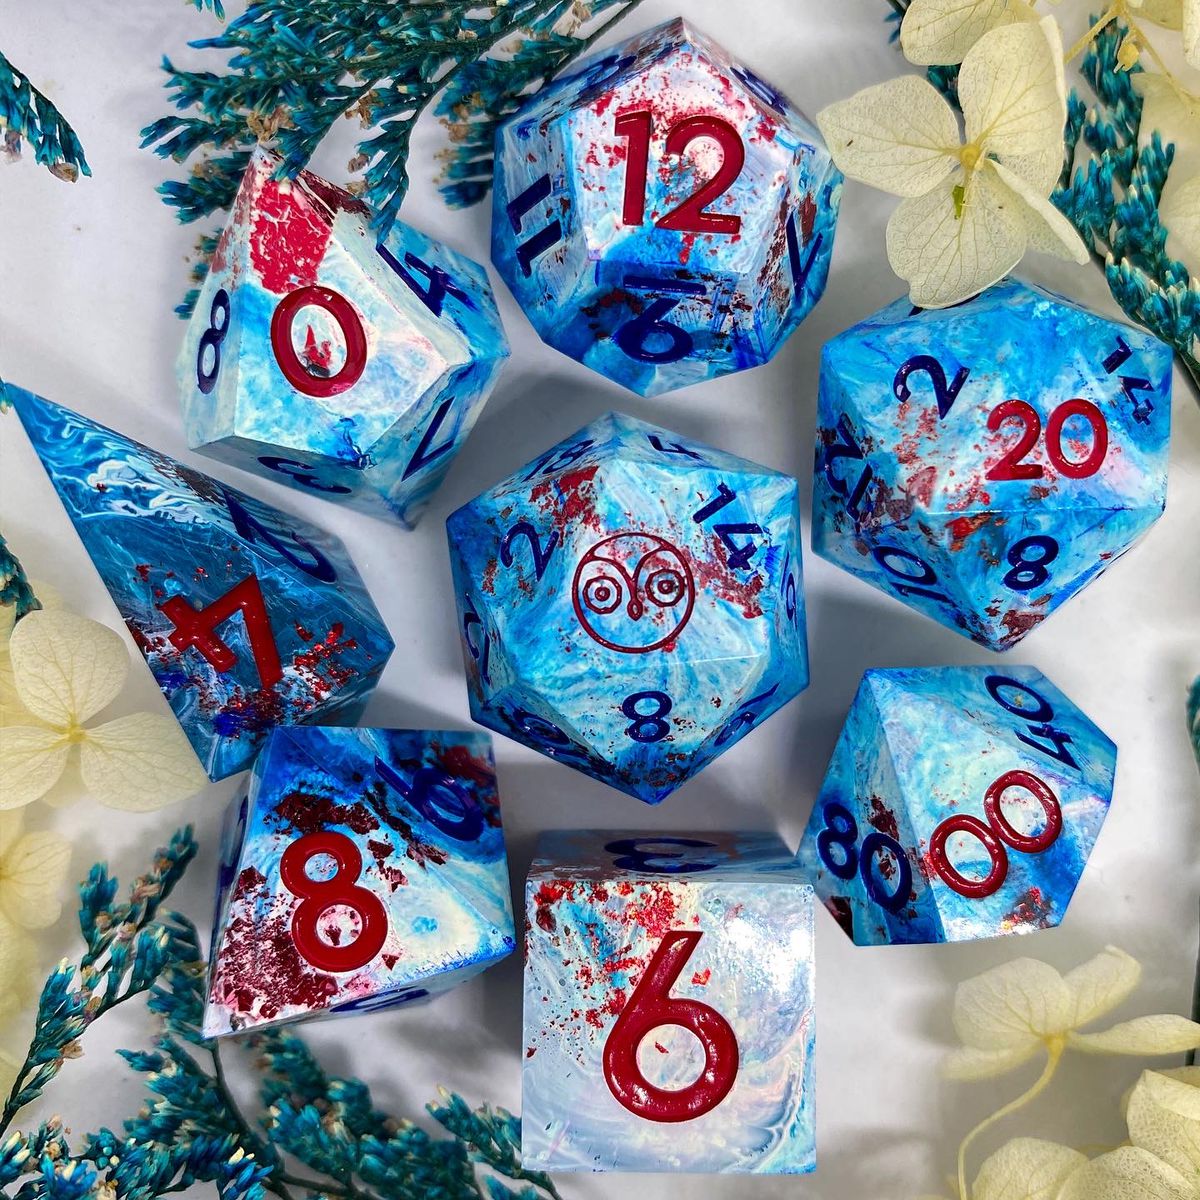 Blue and white dice with red, inked red, an owl logo on the 20 side.